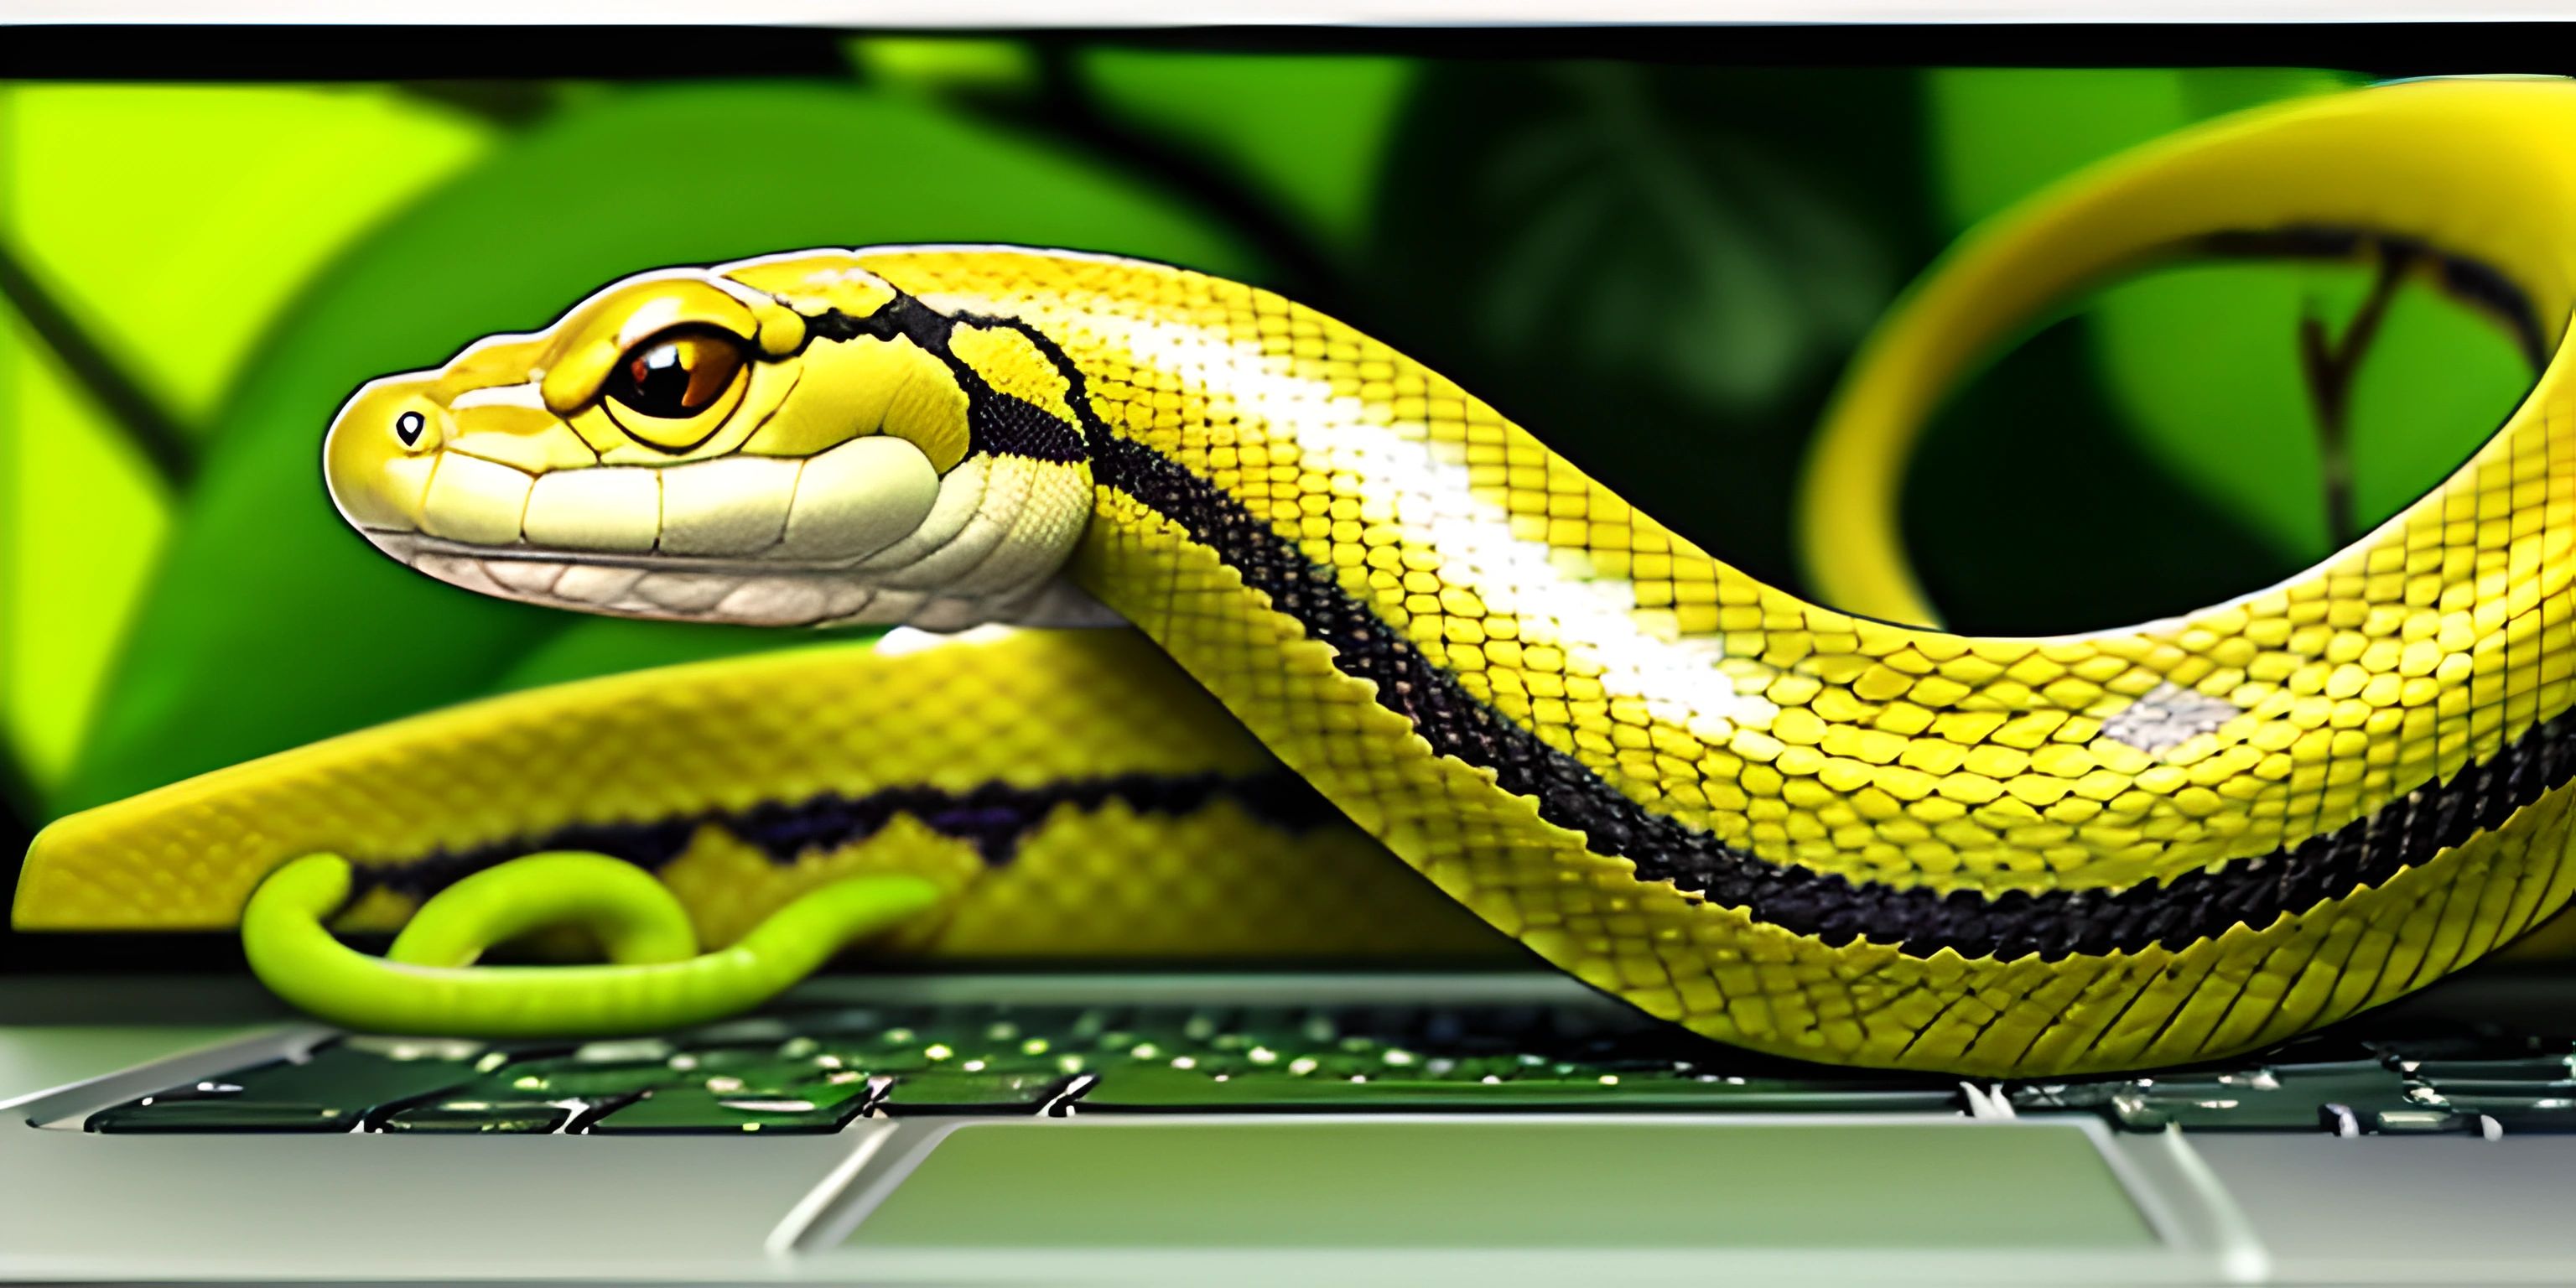 a green snake on a computer screen next to a keyboard and mouse pad and two hands